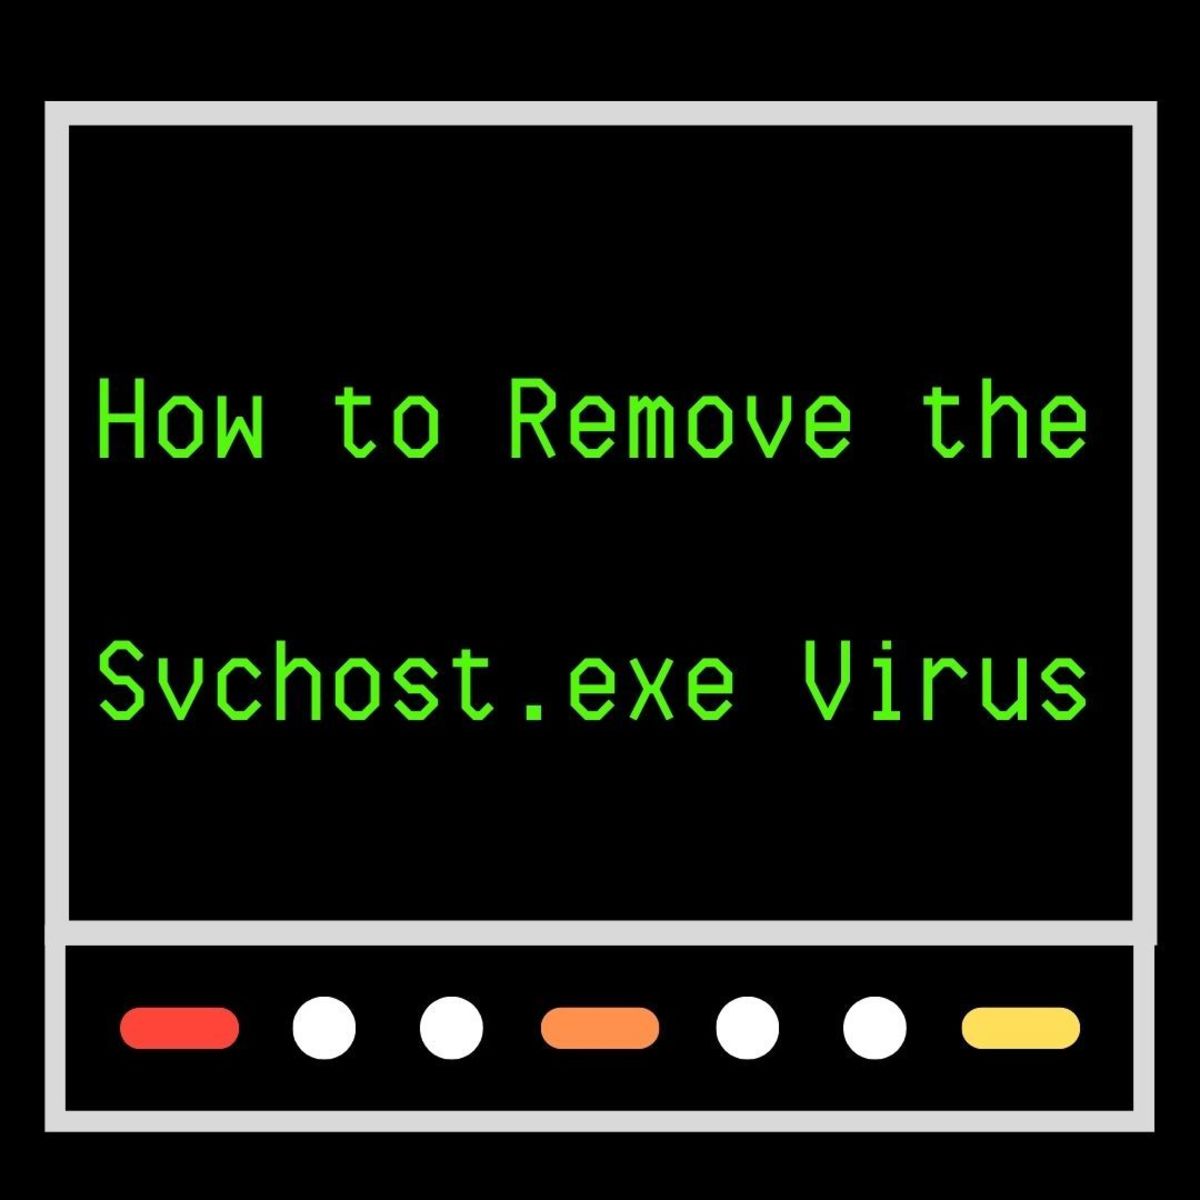  In this article, I'll be helping you deal with one very annoying bit of malware that uses svchost.exe as a guise to decimate your computer.